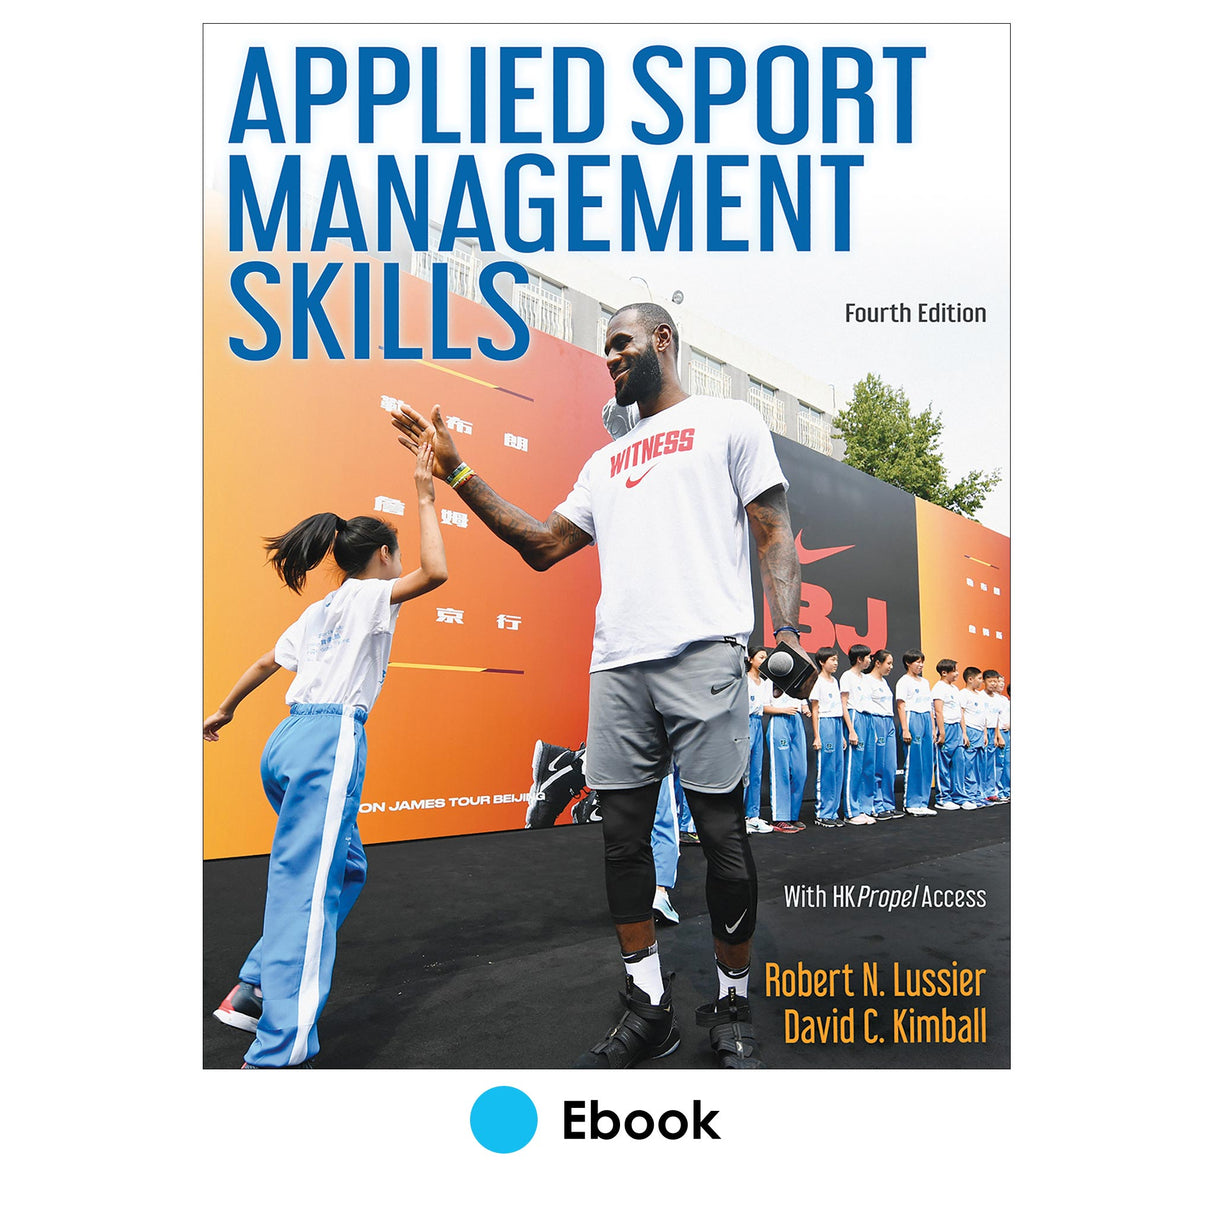 Applied Sport Management Skills 4th Edition Ebook With HKPropel Access